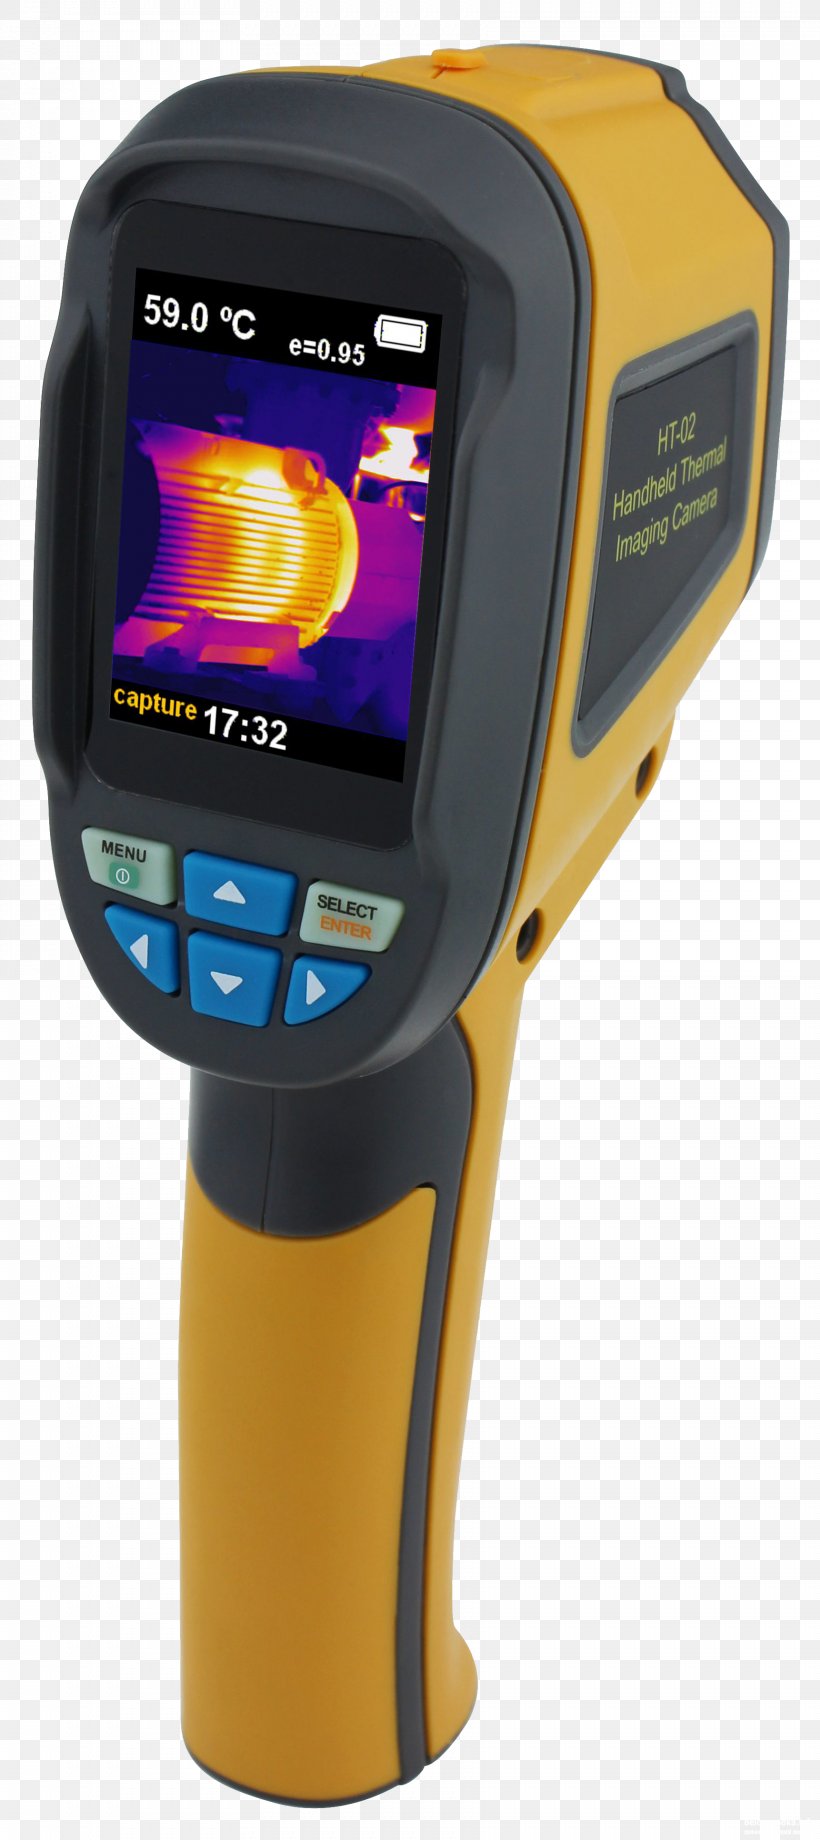 Thermographic Camera Infrared Thermal Imaging Cameras Thermography, PNG, 1722x3864px, Thermographic Camera, Camera, Digital Cameras, Display Device, Handheld Devices Download Free